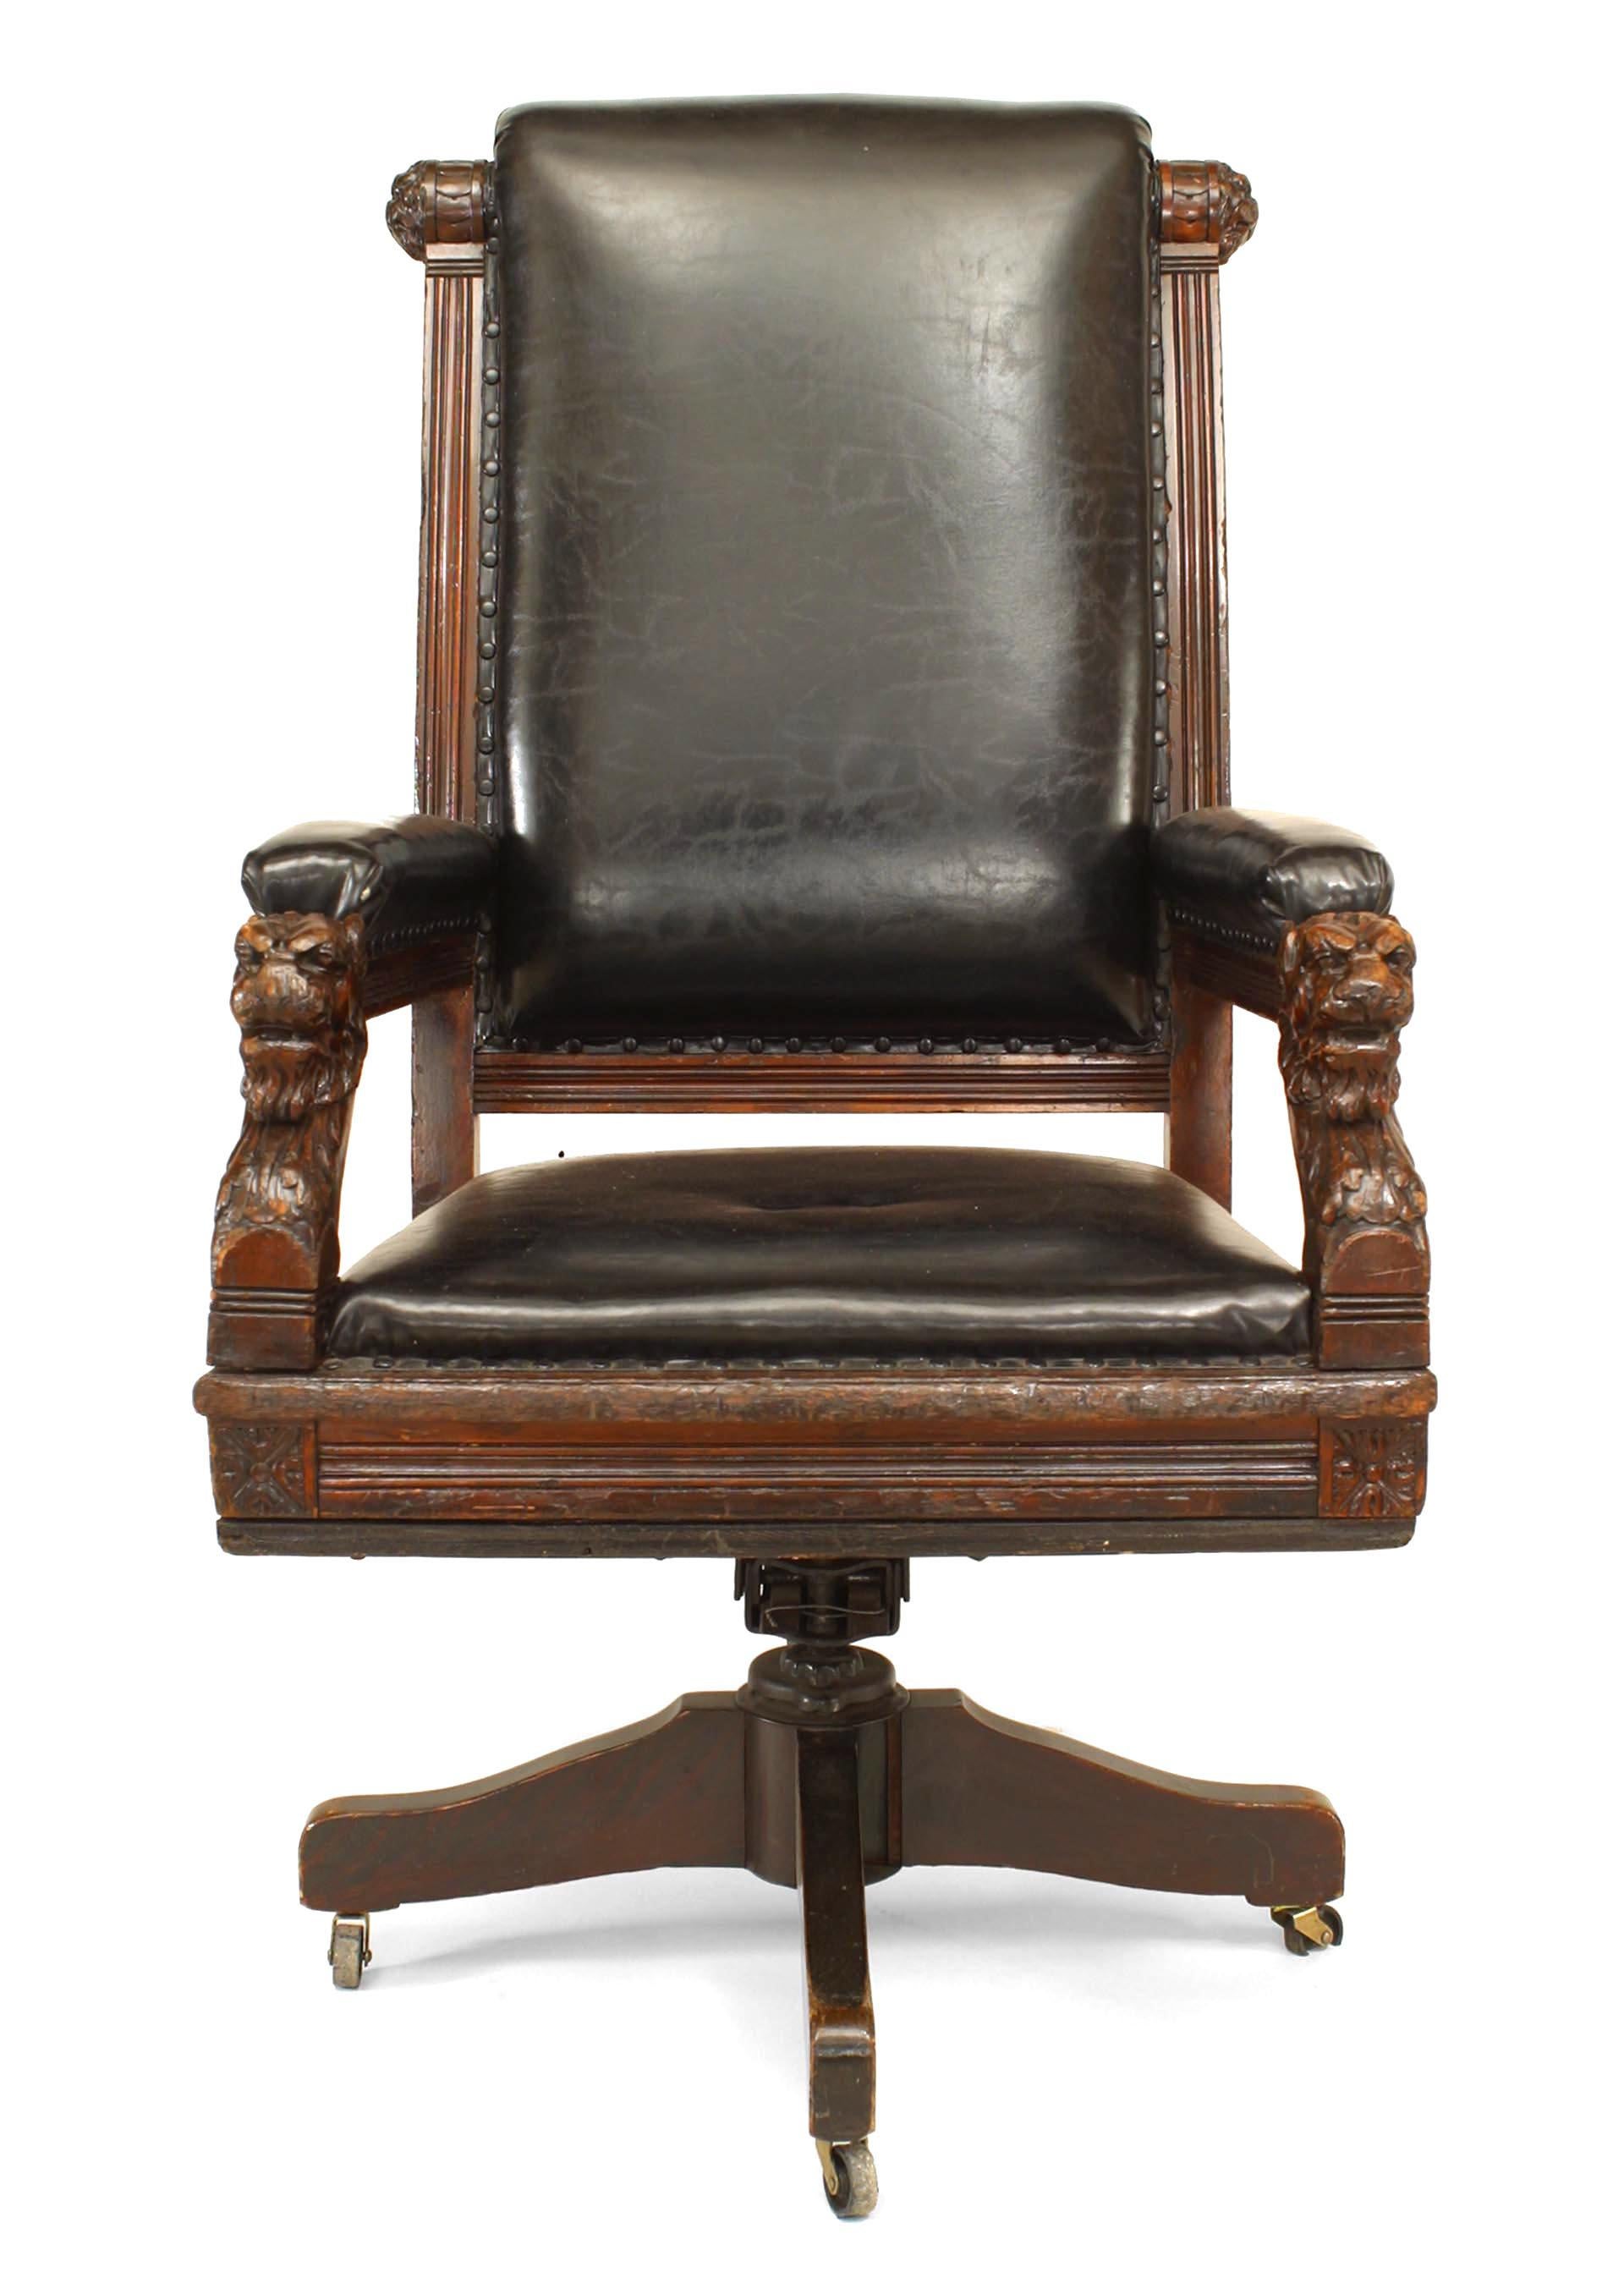 English Victorian high back black leather judge's swivel chair with carved lion heads on arms.